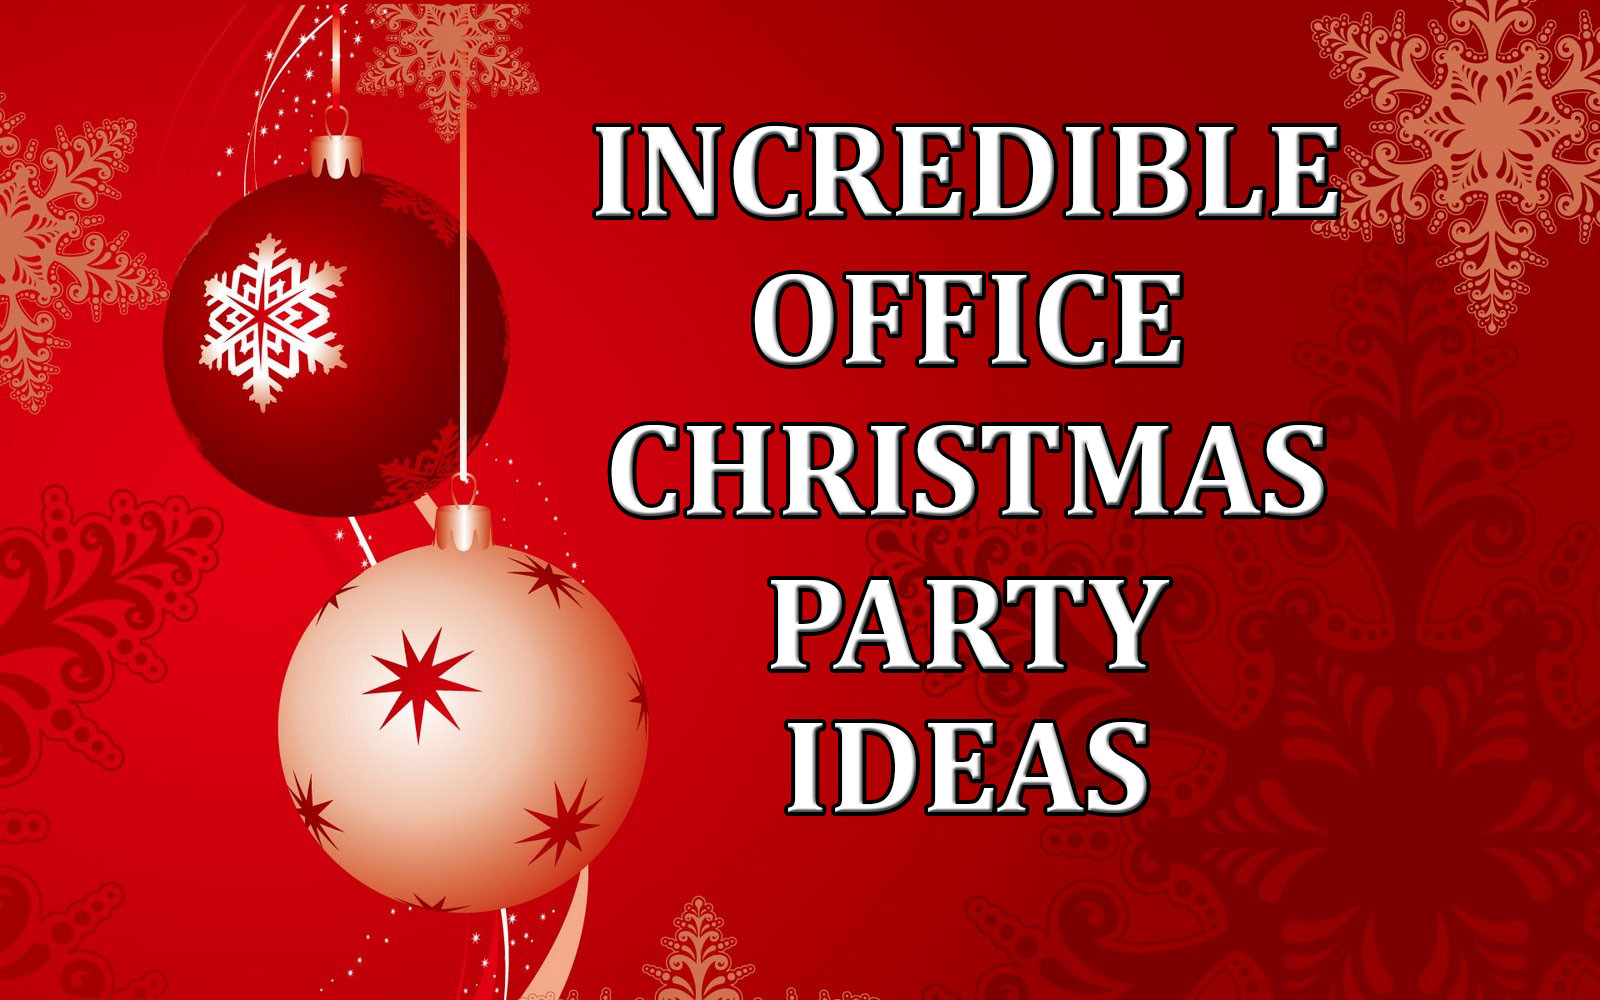 Holiday Office Party Ideas
 Incredible fice Christmas Party Ideas edy Ventriloquist